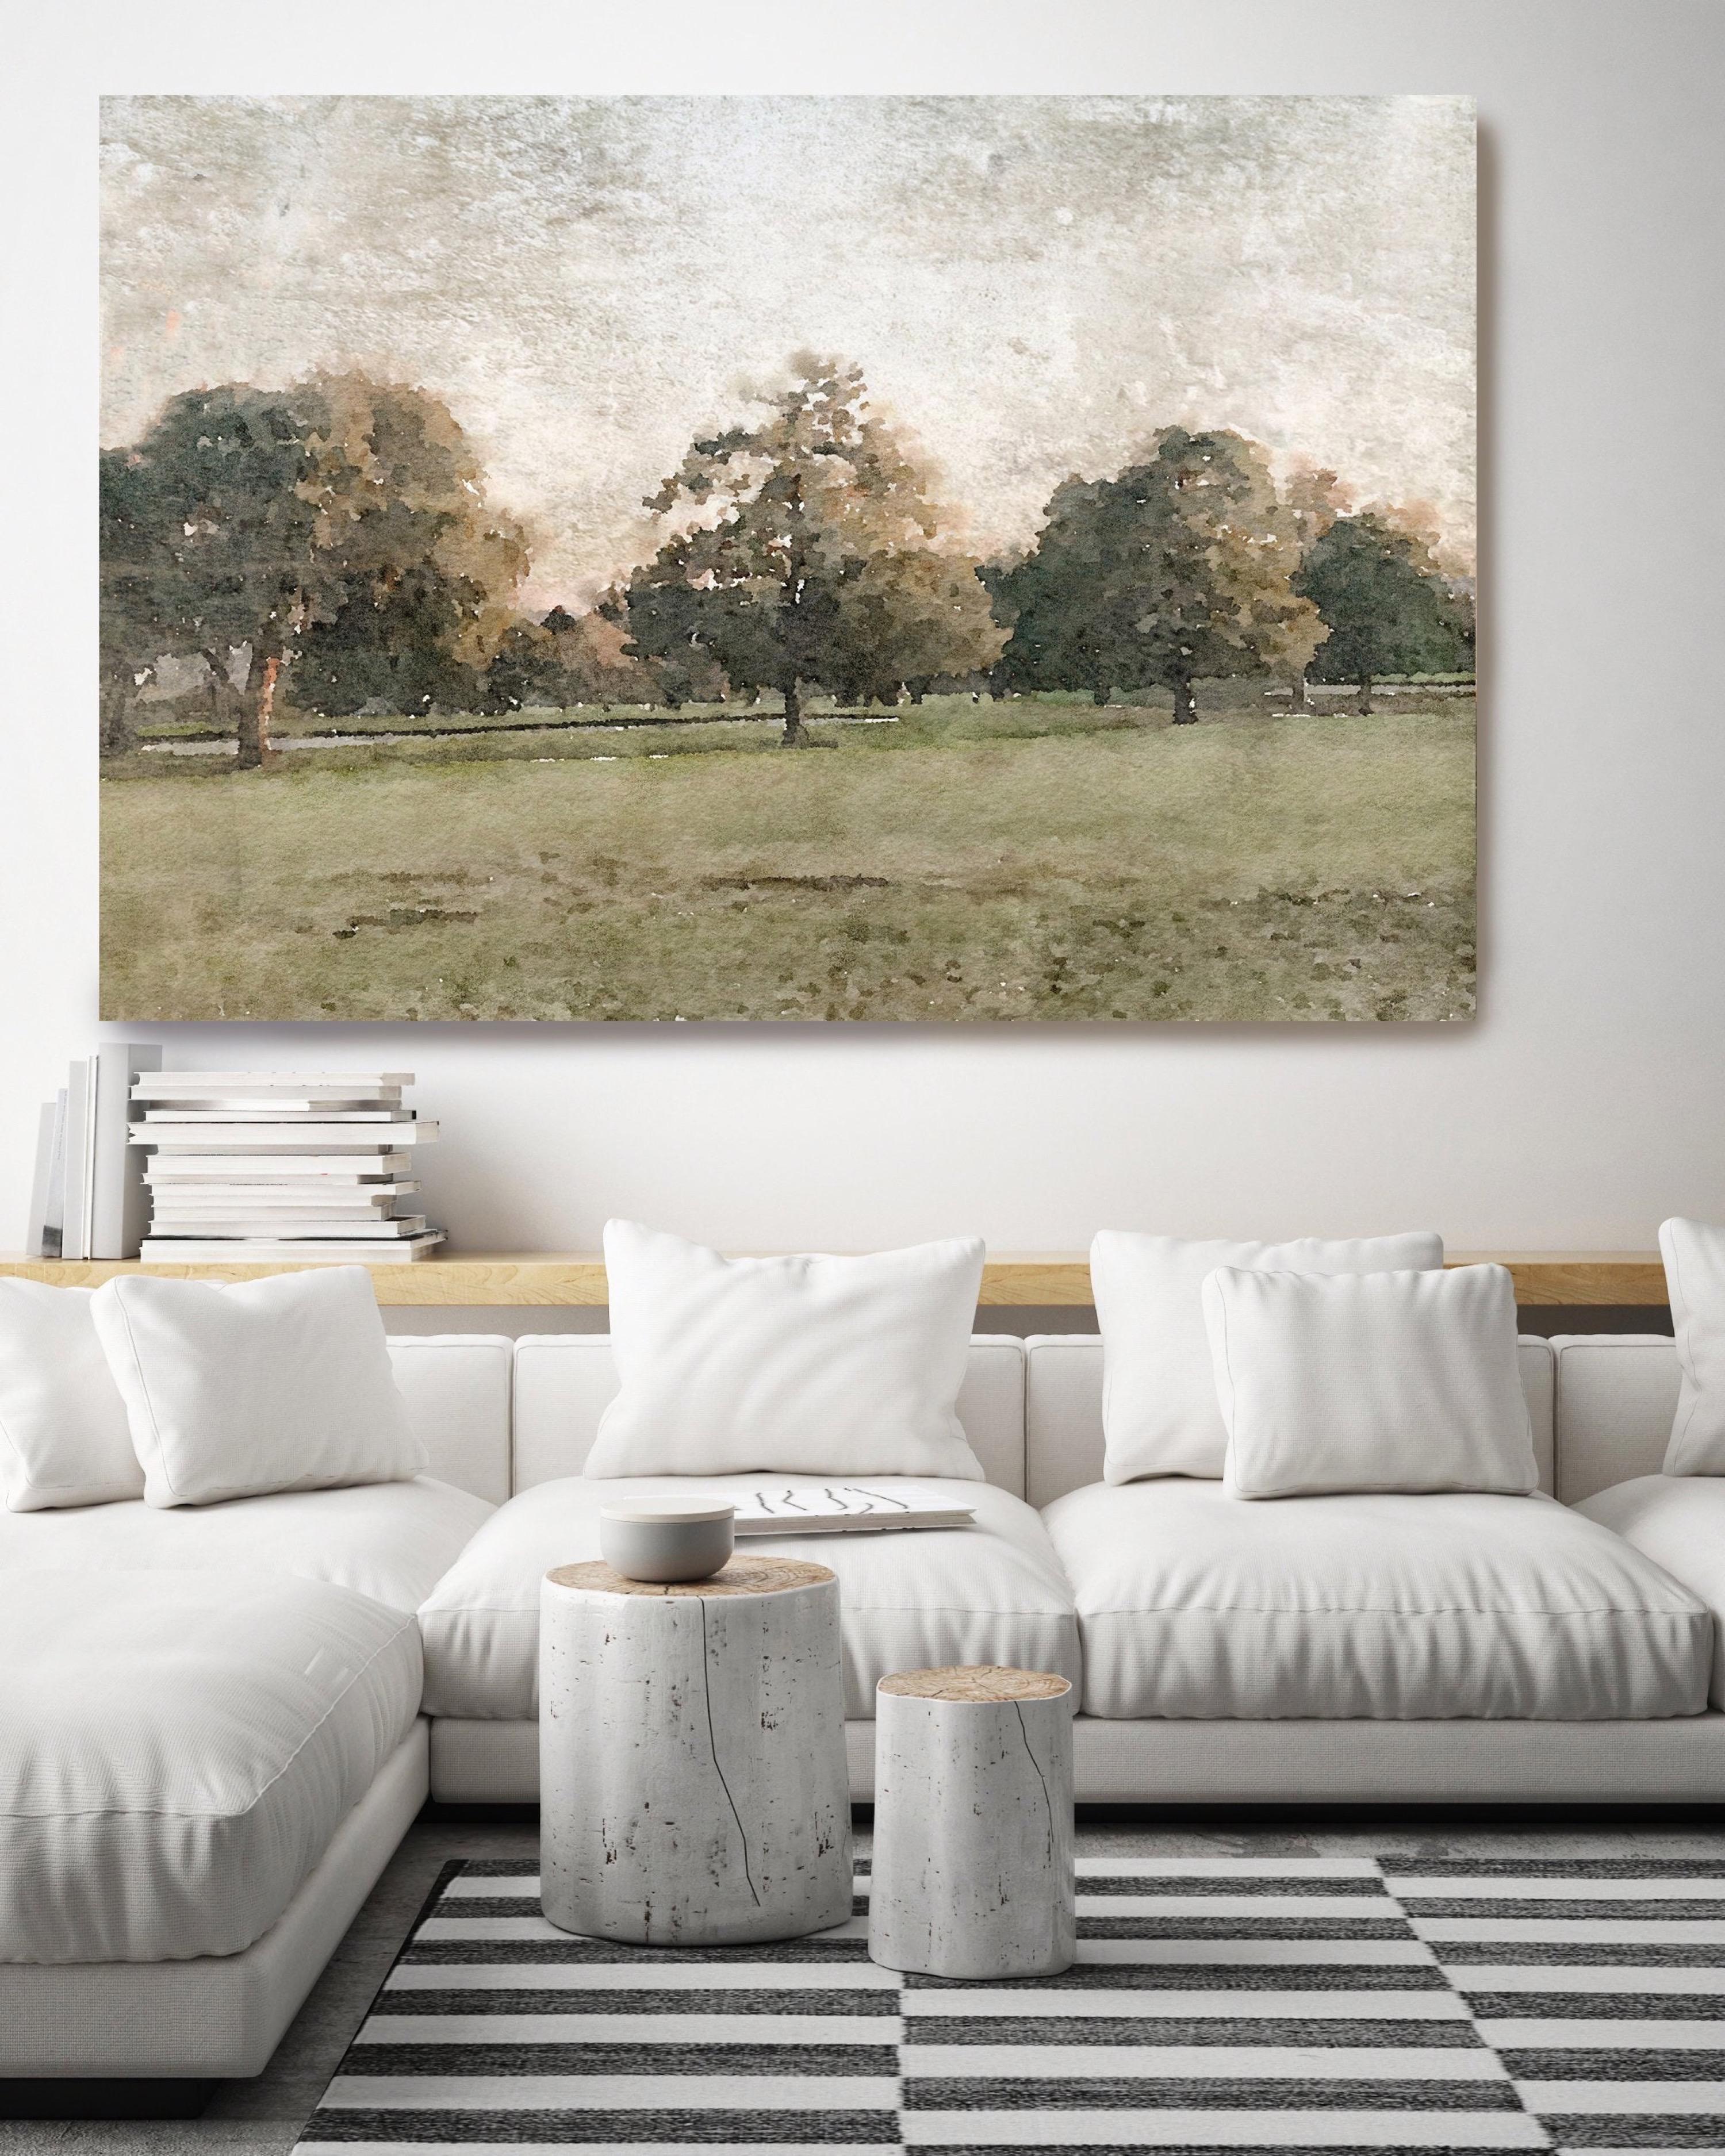 Rural Landscape, November morning, Landscape Painting Hand Embellished Giclee on Canvas

Collector's Edition Embellished Art Canvas Giclee With Brushstrokes and rich texture.

State-of-the-art HAND EMBELLISHED ∽ MUSEUM QUALITY ∽ DISPLAY READY Giclee